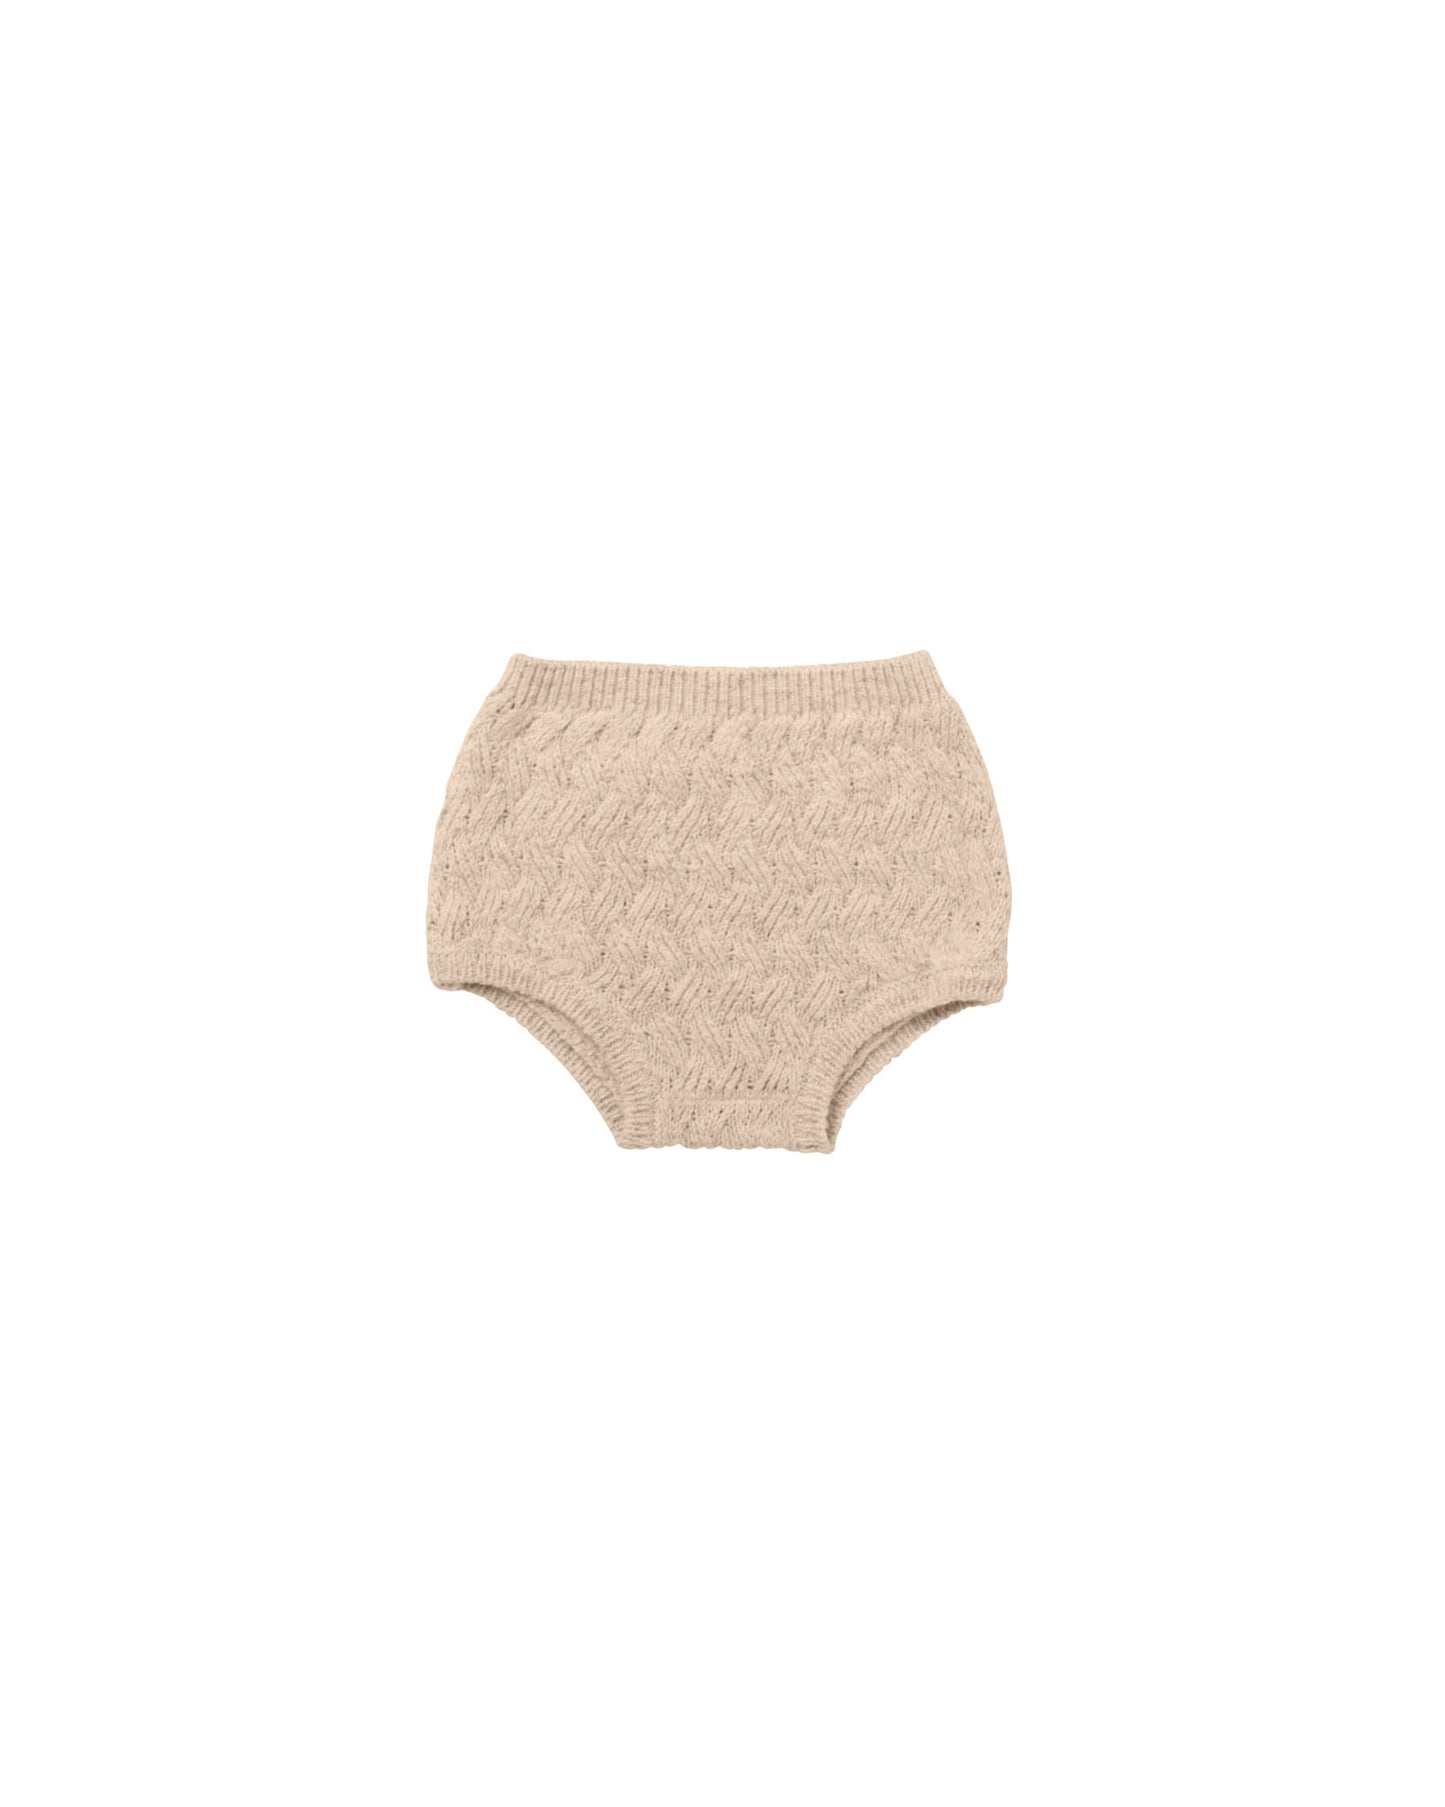 Quincy Mae Knit Bloomer Shell